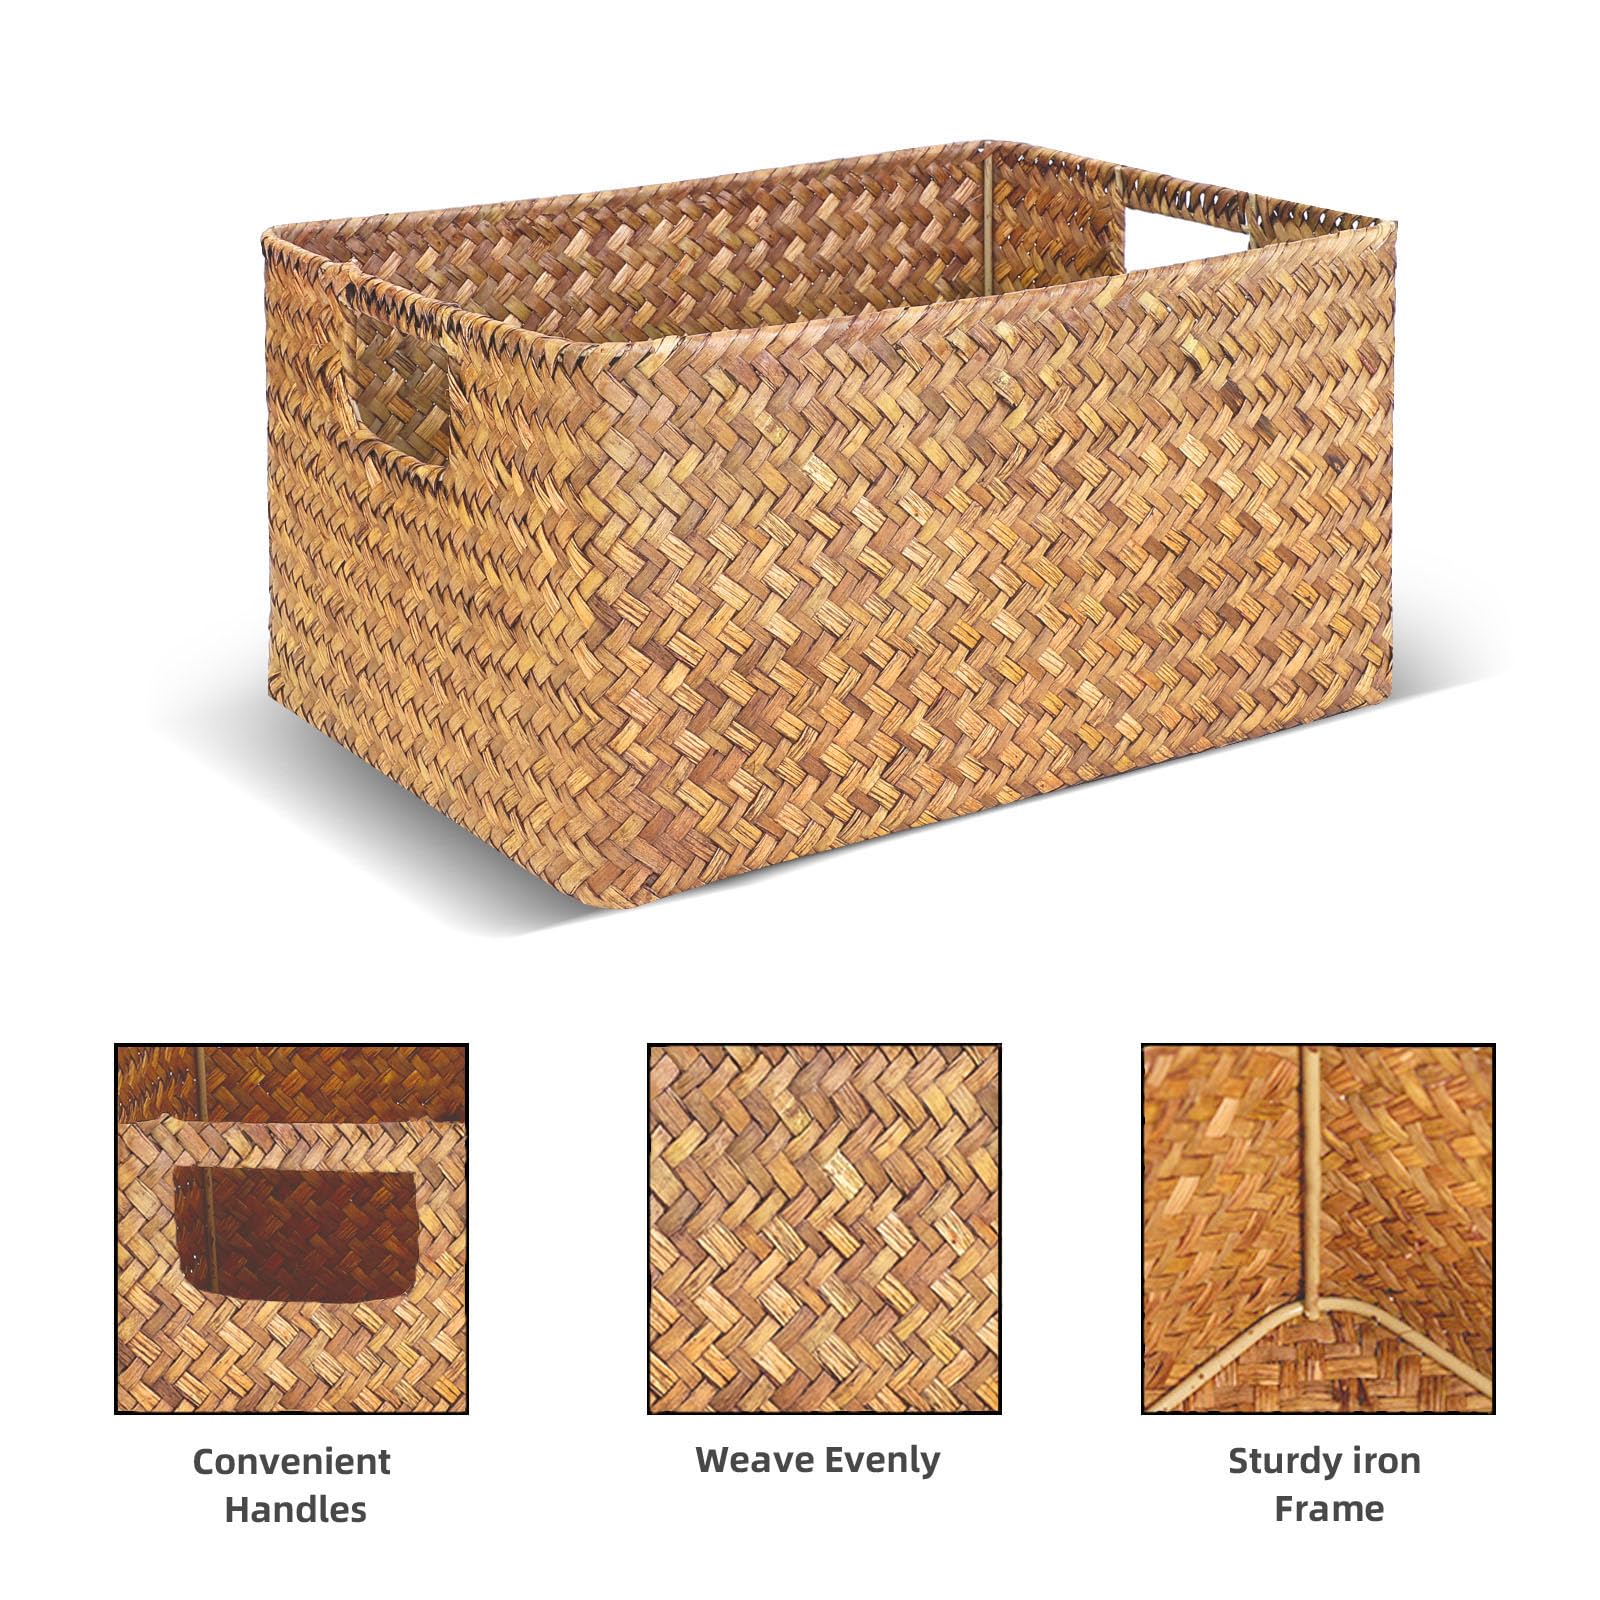 YIFANZHIBIAN Large Seagrass Storage Baskets Bin for Organizing, Rectangular Wicker Baskets with Built-in Handles Handwoven Storage Basket Boxes for Home Organization, 3-pack